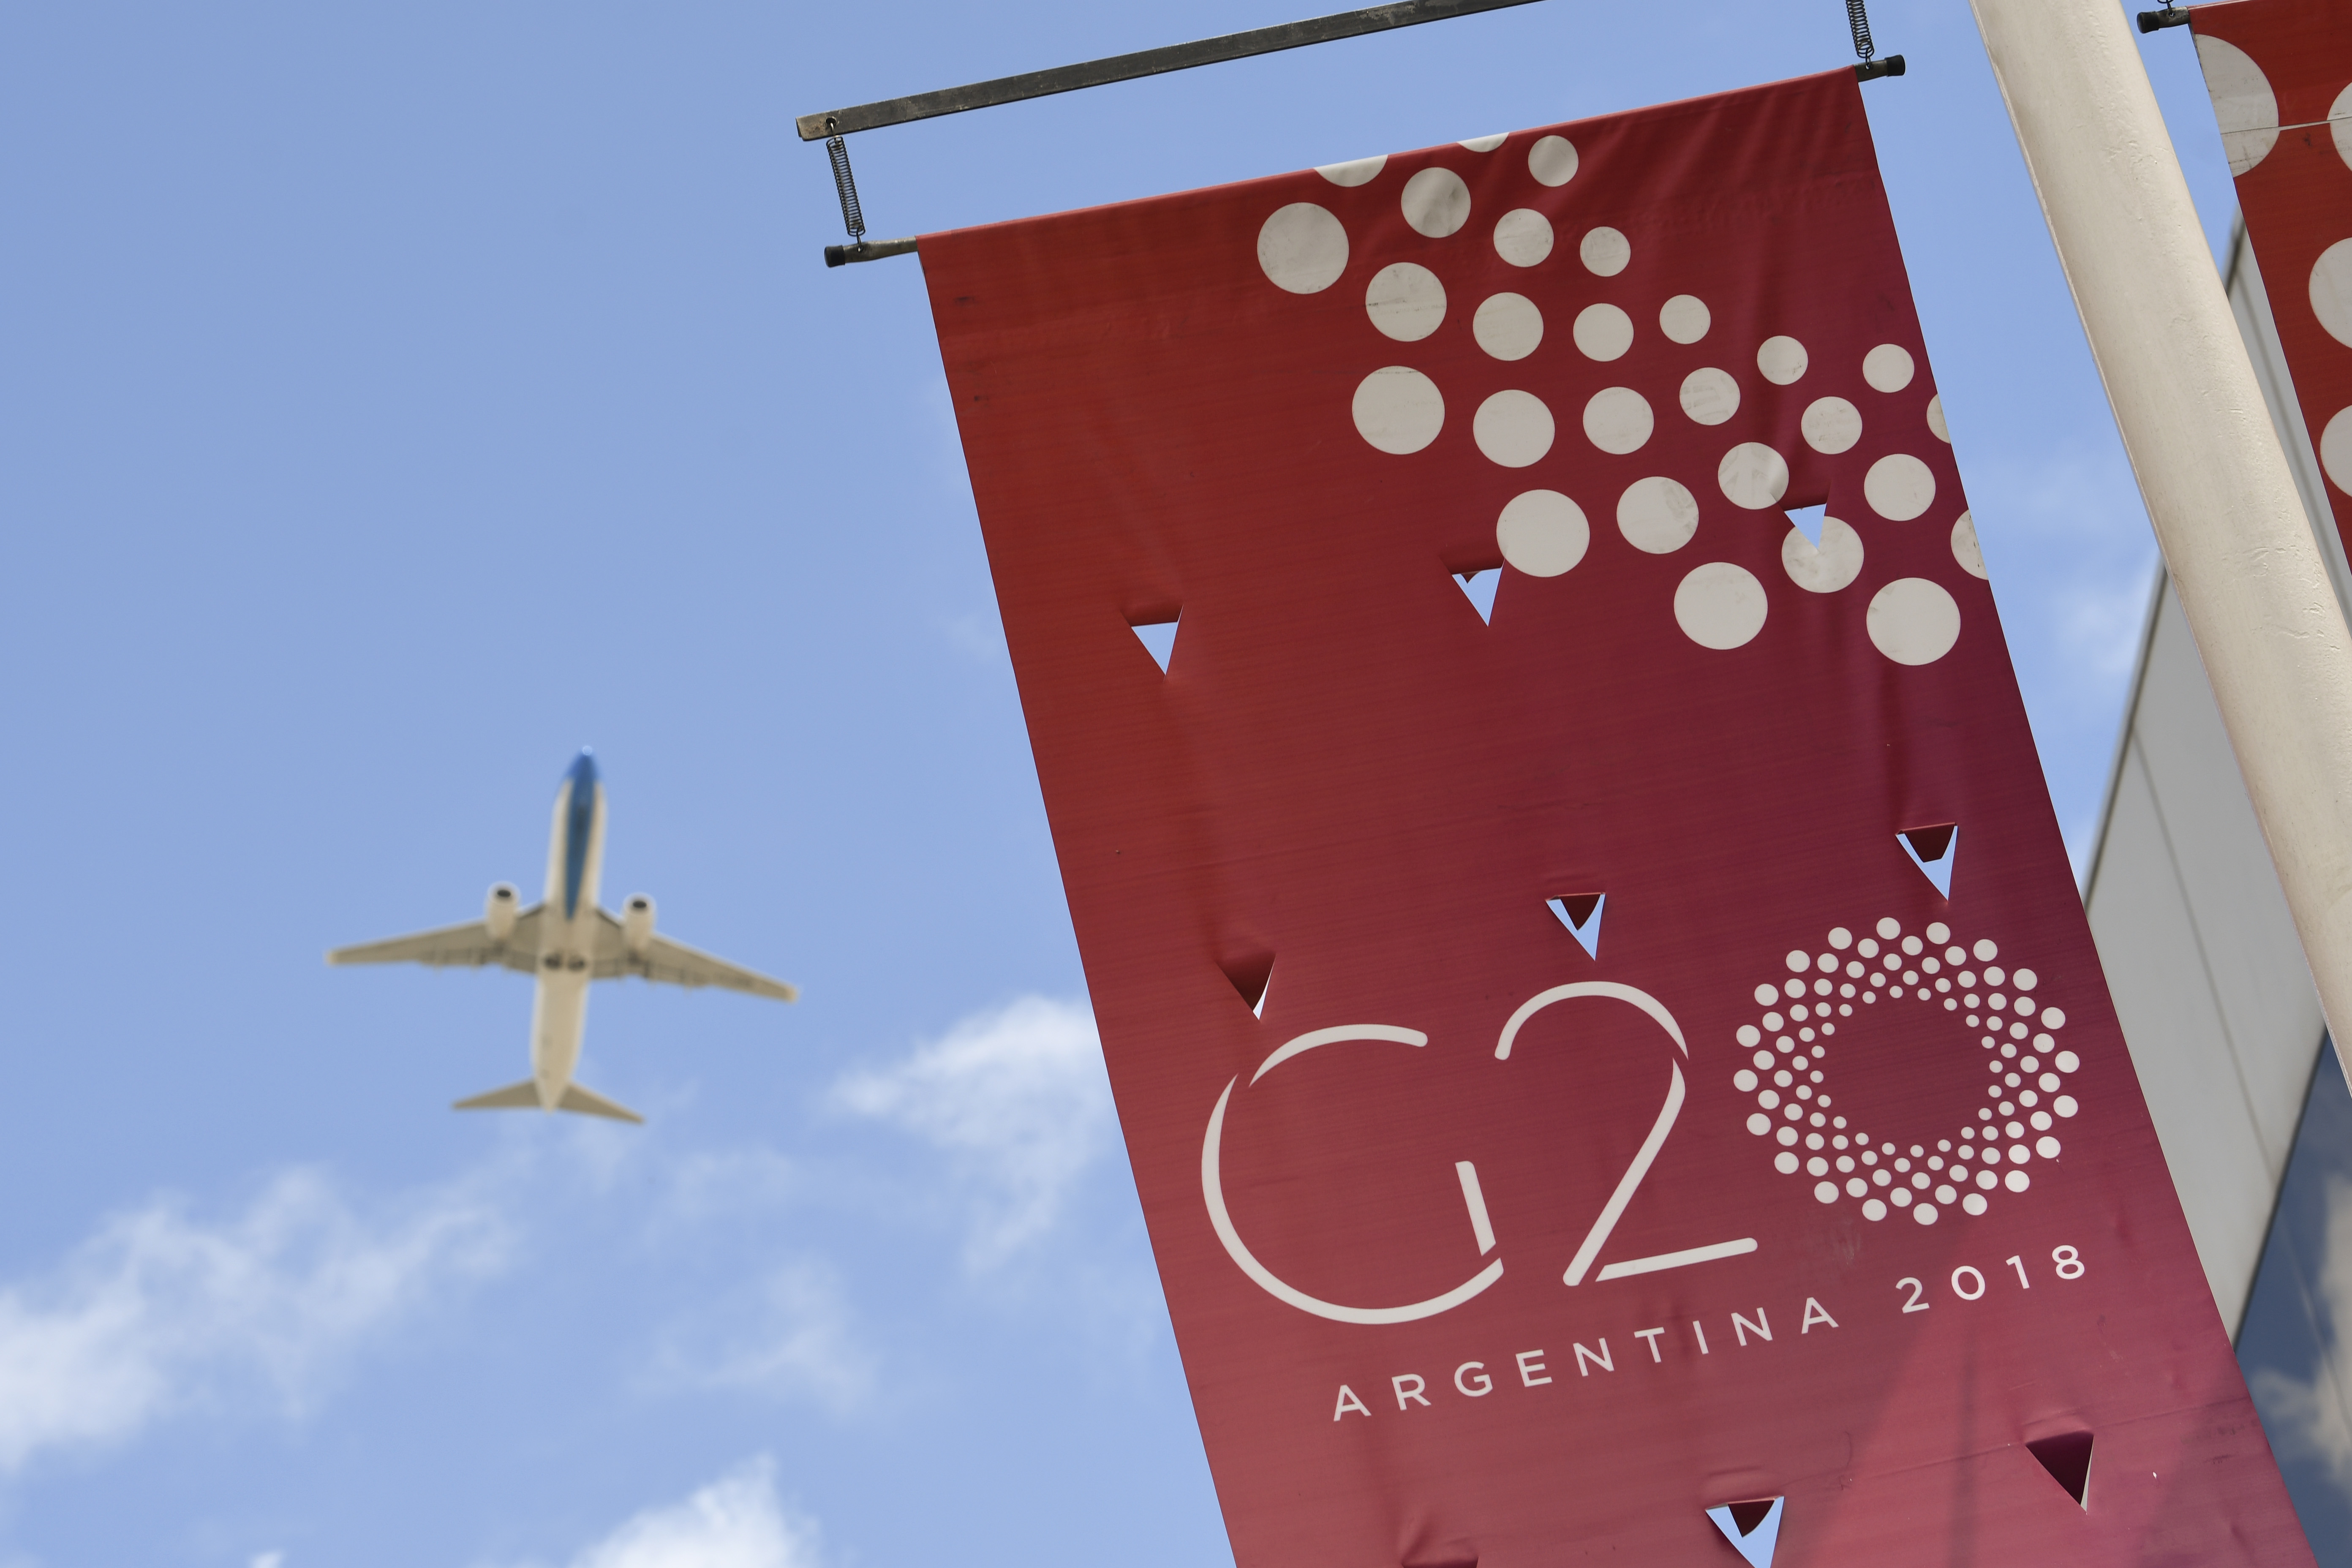 A plane flies over the G20 summit venue at the Costa Salguero Centre in Buenos Aires, Argentina